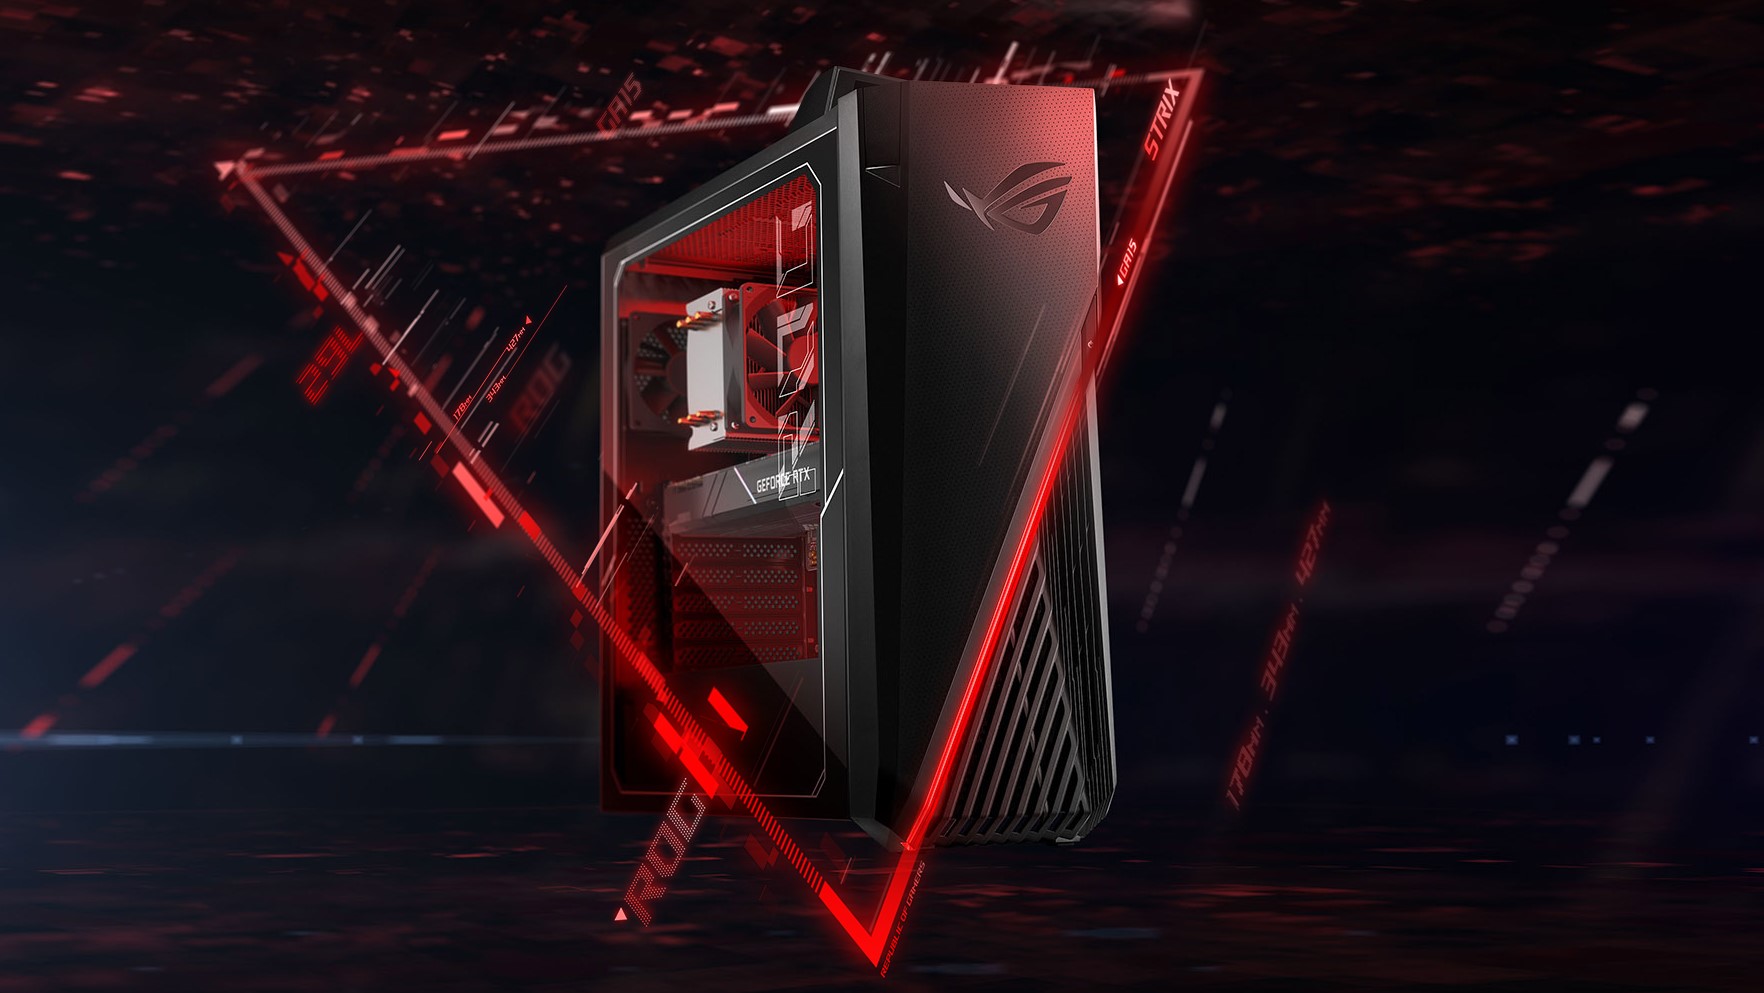 ASUS ROG Strix gaming pc review: "One of the best gaming machines of the year" | GamesRadar+